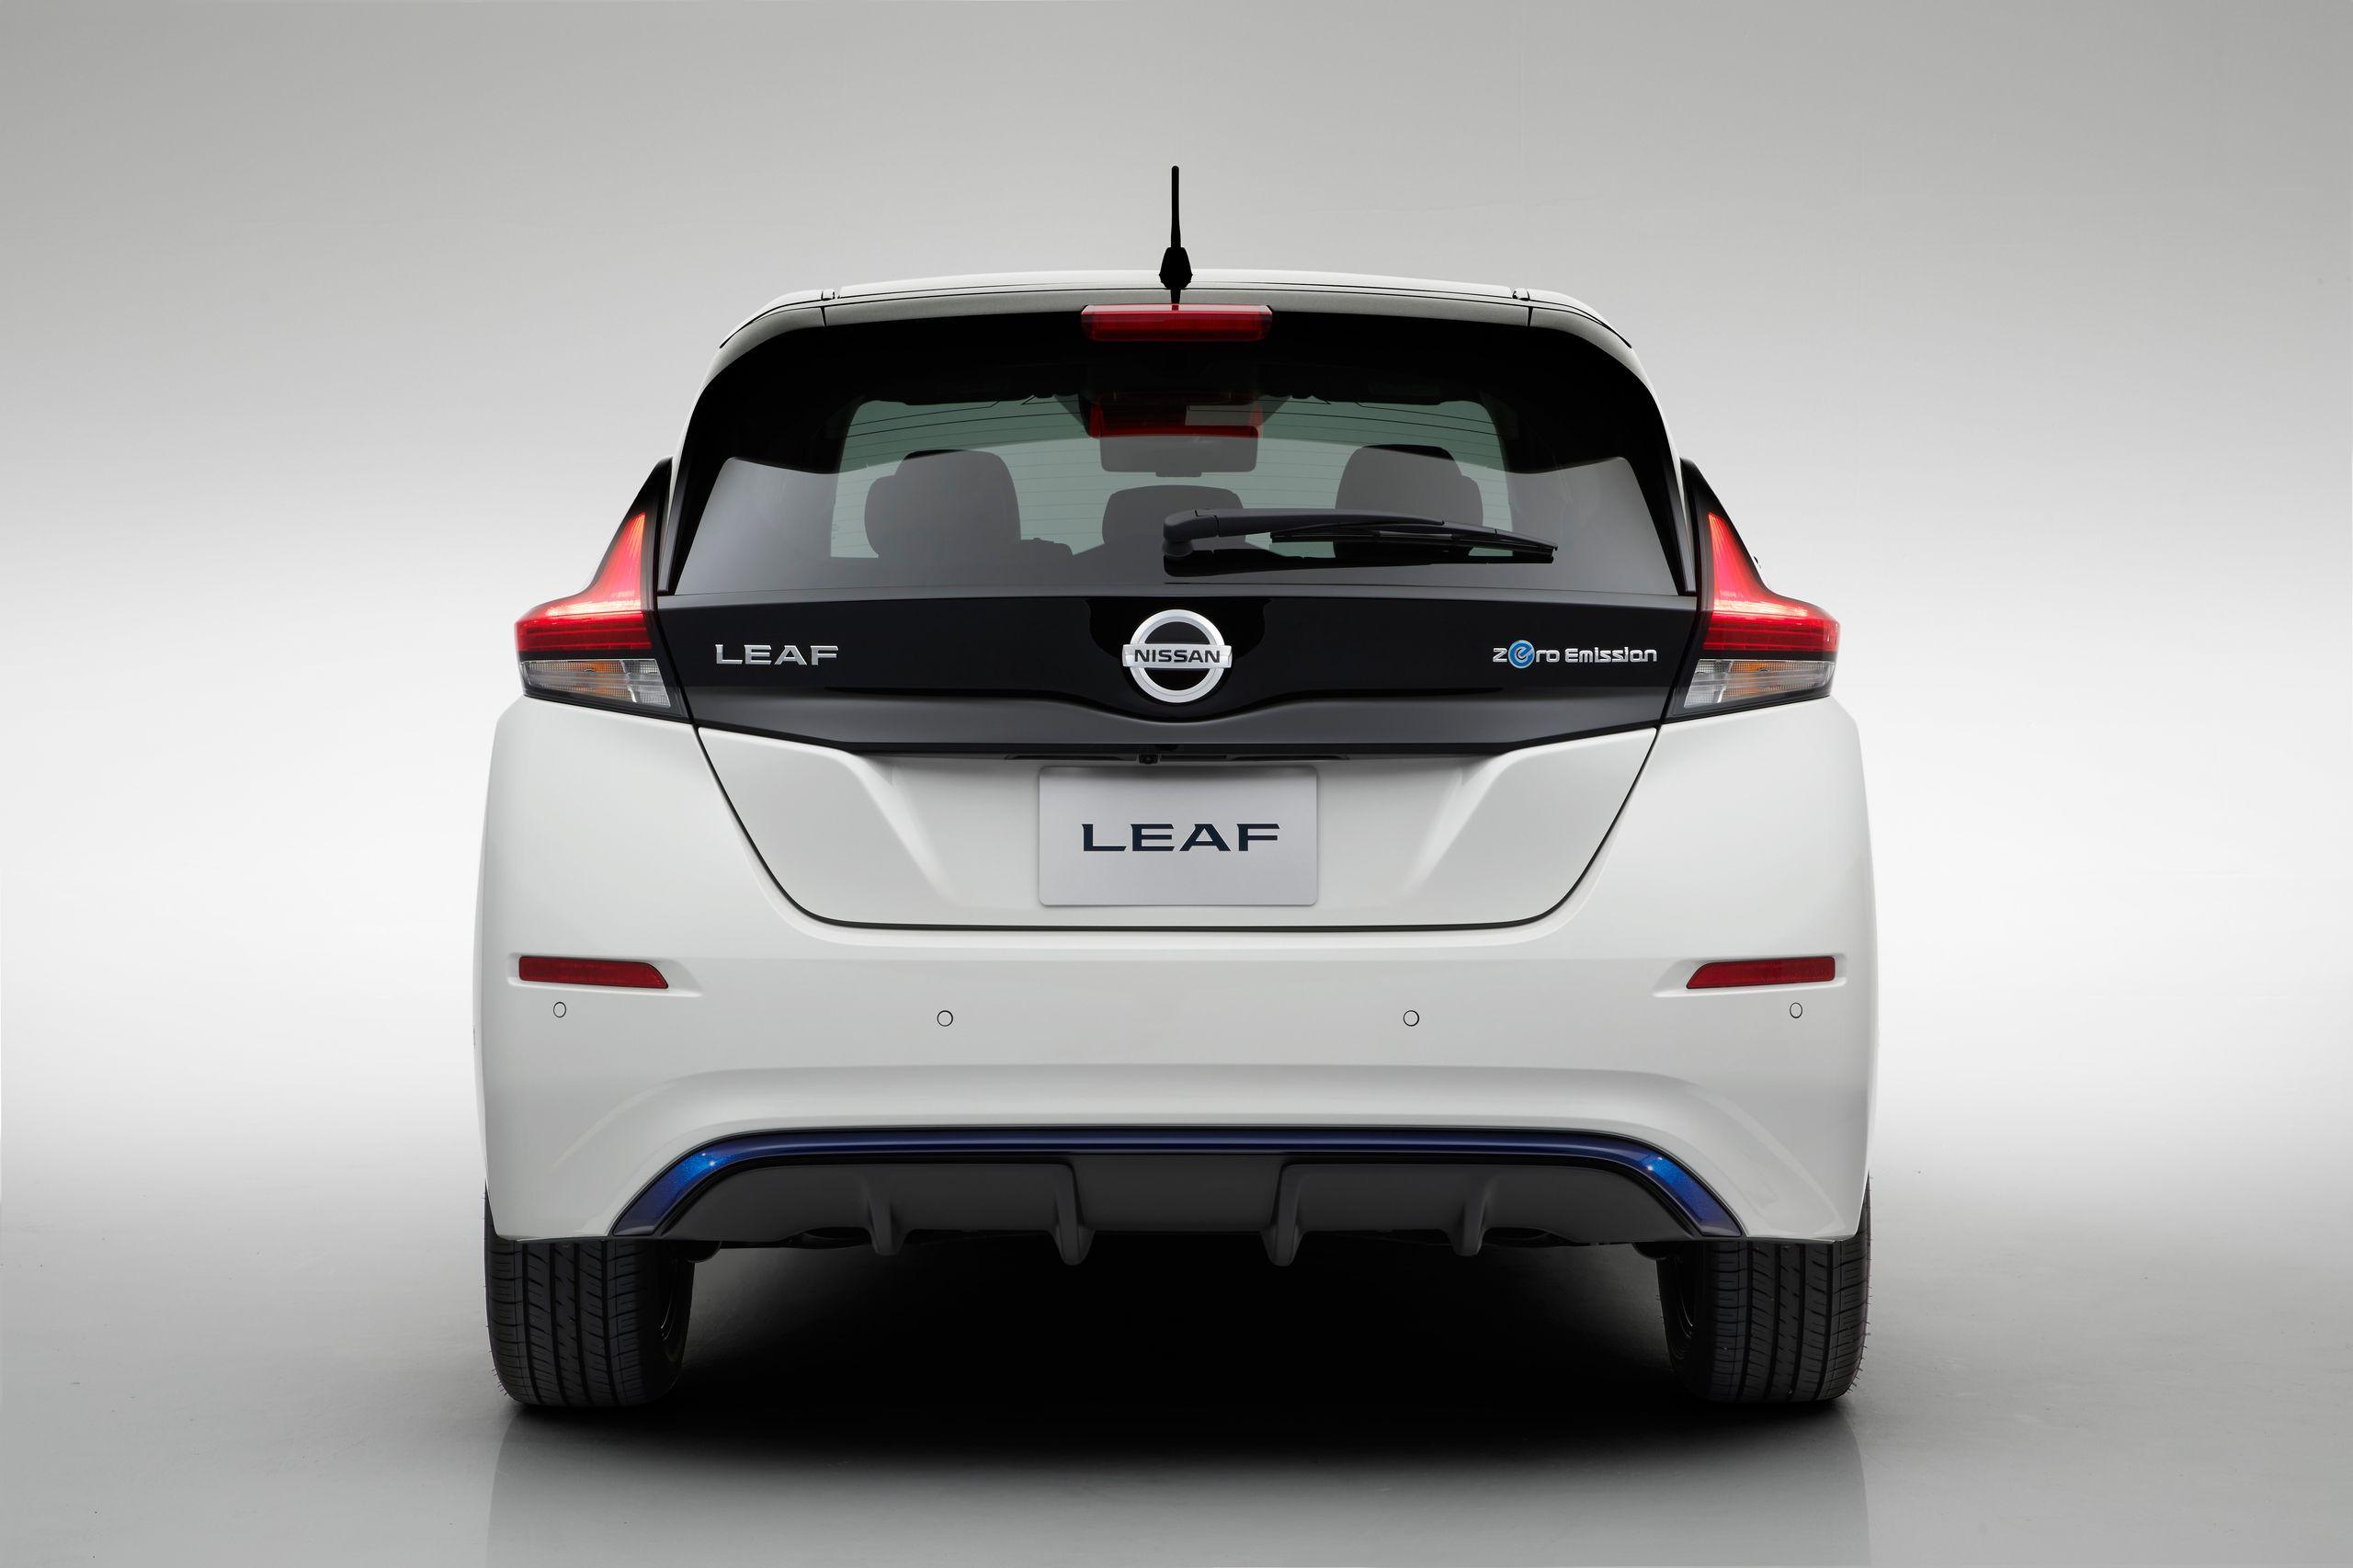 Nissan LEAF Wallpaper Galore: Own It In January, On Your